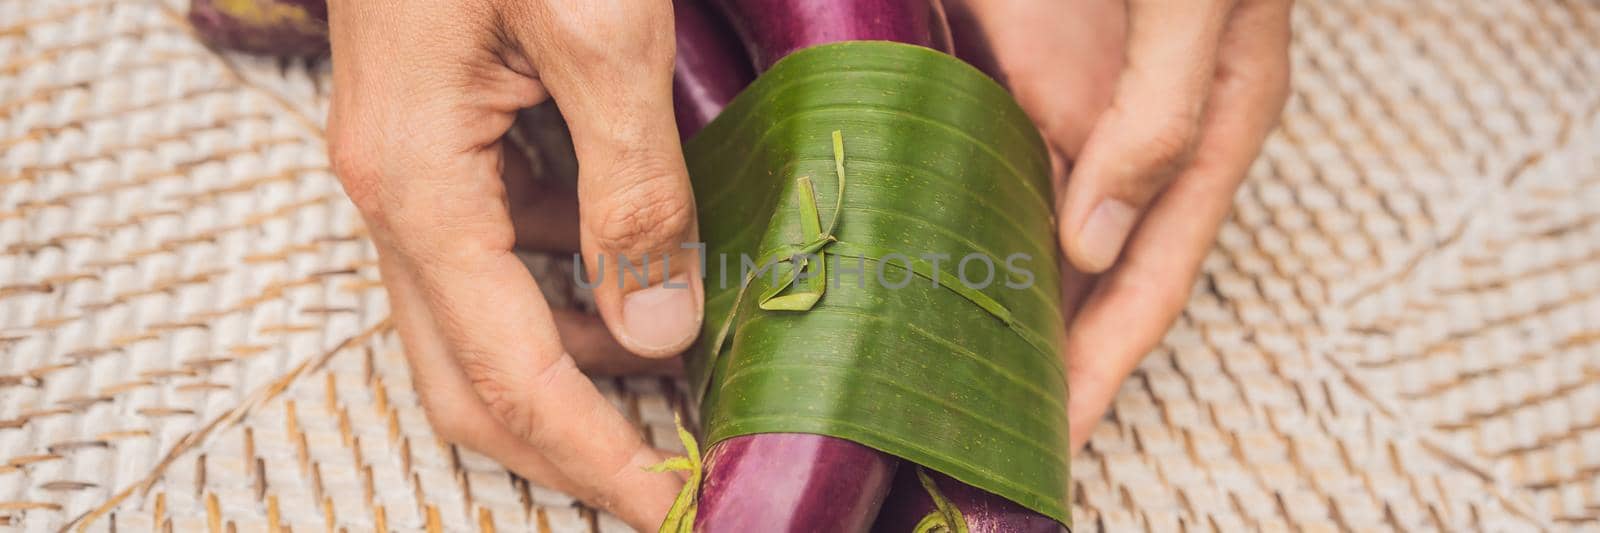 BANNER, LONG FORMAT Eco-friendly product packaging concept. Eggplant wrapped in a banana leaf, as an alternative to a plastic bag. Zero waste concept. Alternative packaging by galitskaya